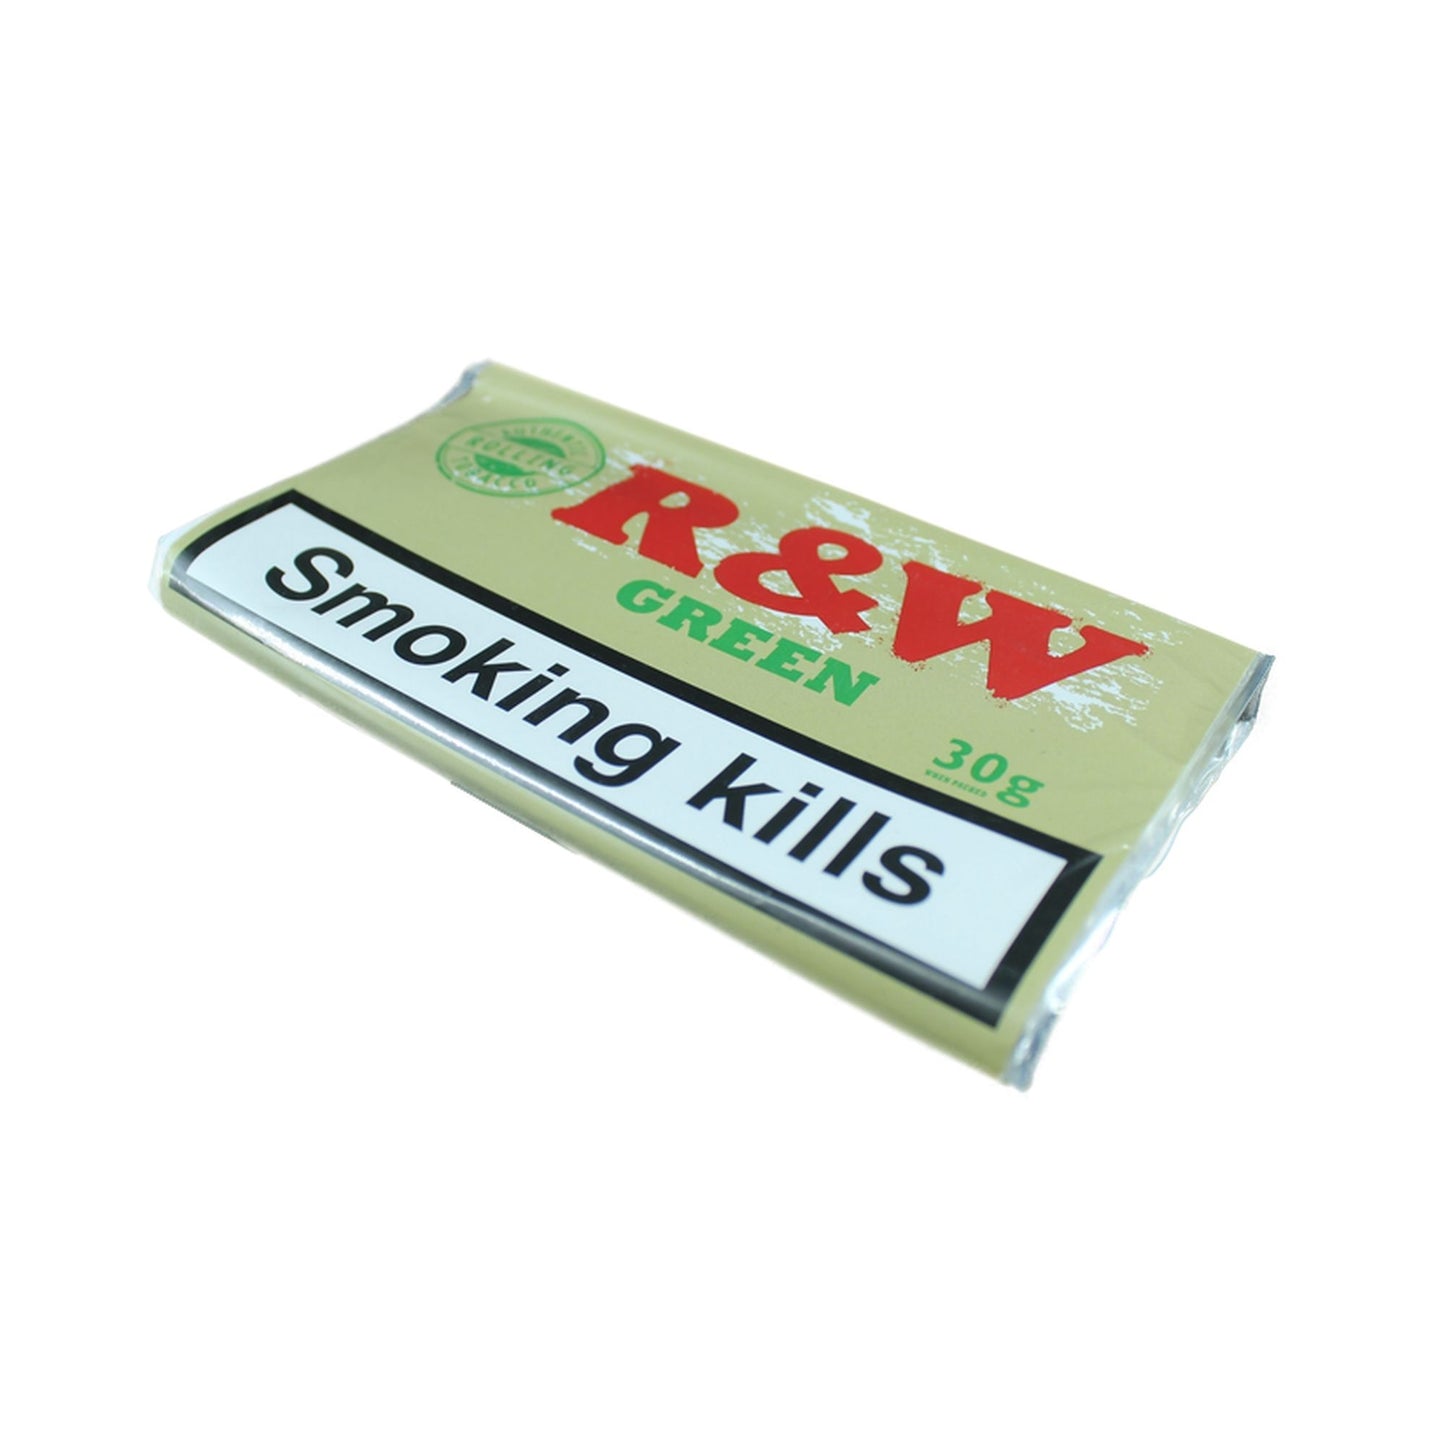 Buy R&W Green Premium Blend Rolling Tobacco online in India